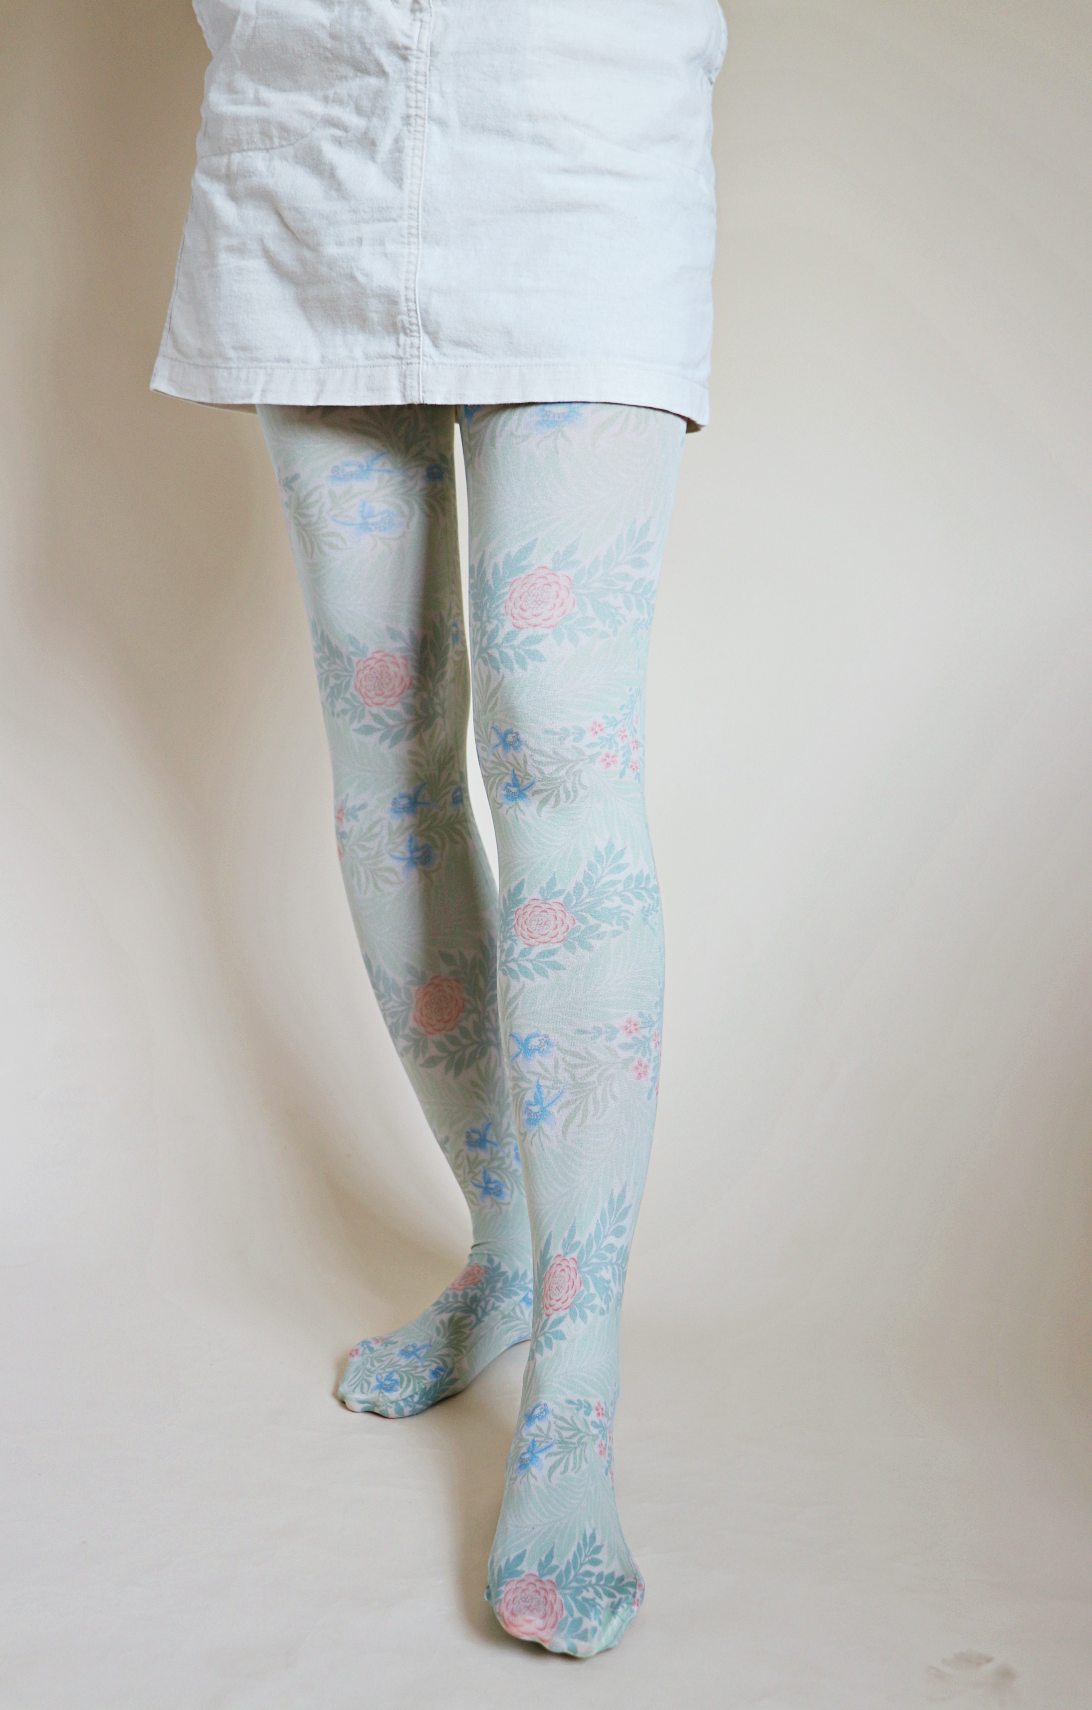 Tights called Larkspur from the William Morris collection of the TABBISOCKS brand, with an overall design of illustrated pink flowers in an antique-ish light blue color